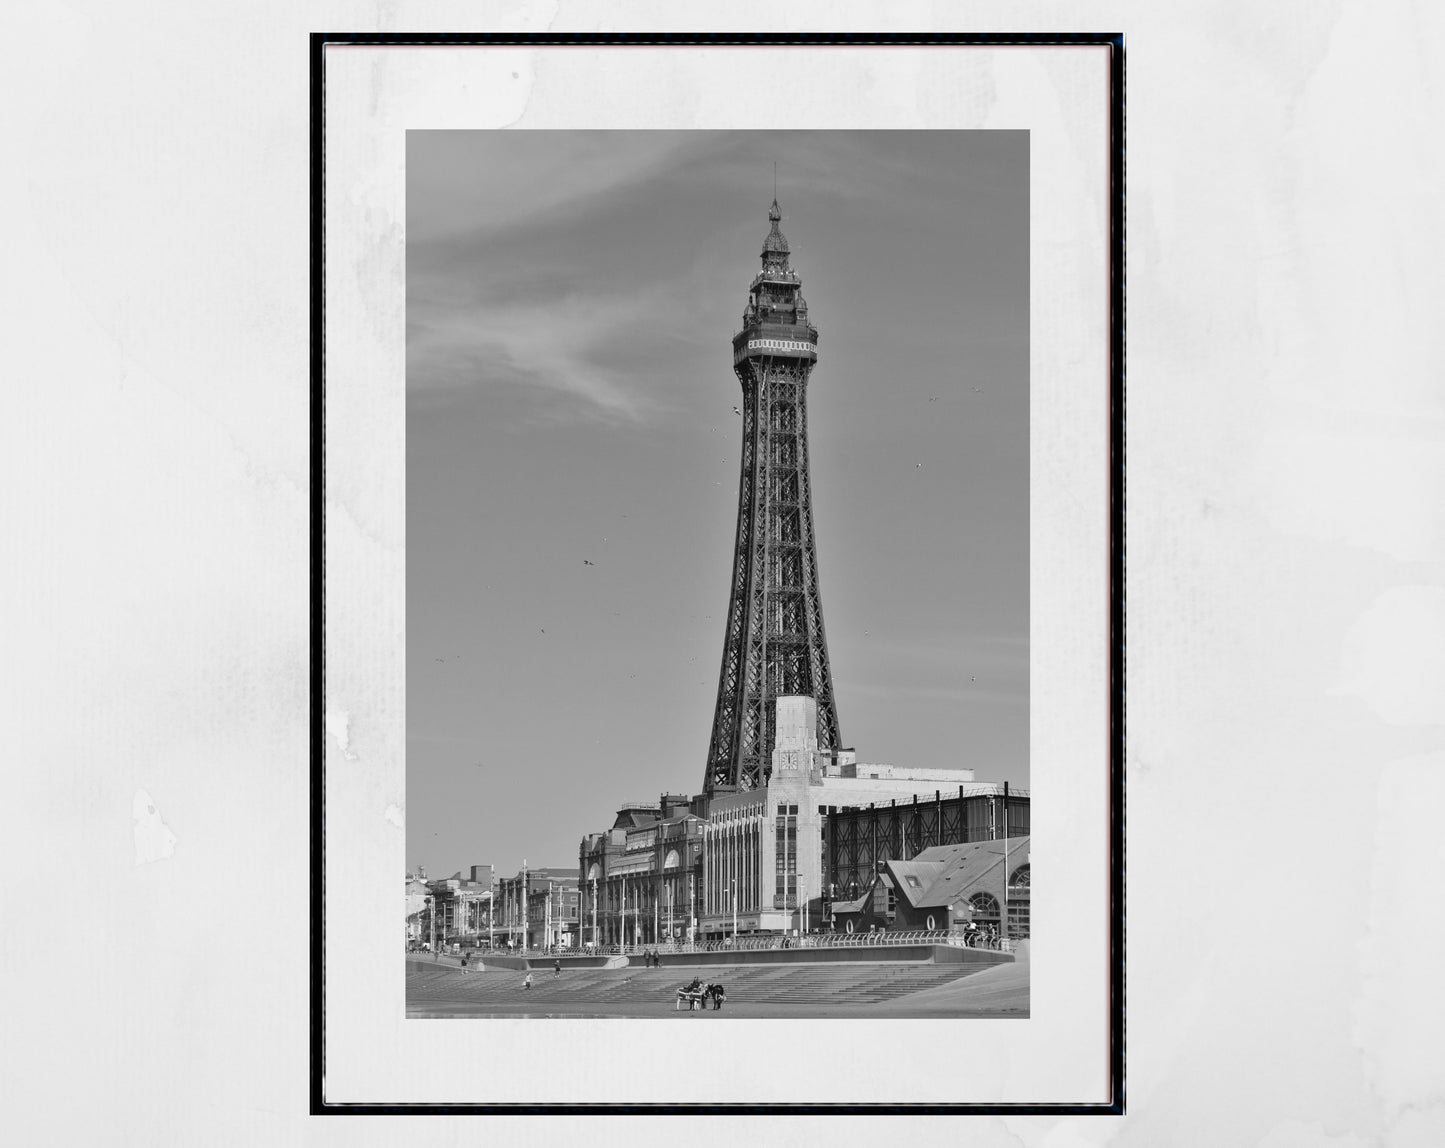 Blackpool Tower Black And White Photography Print Poster